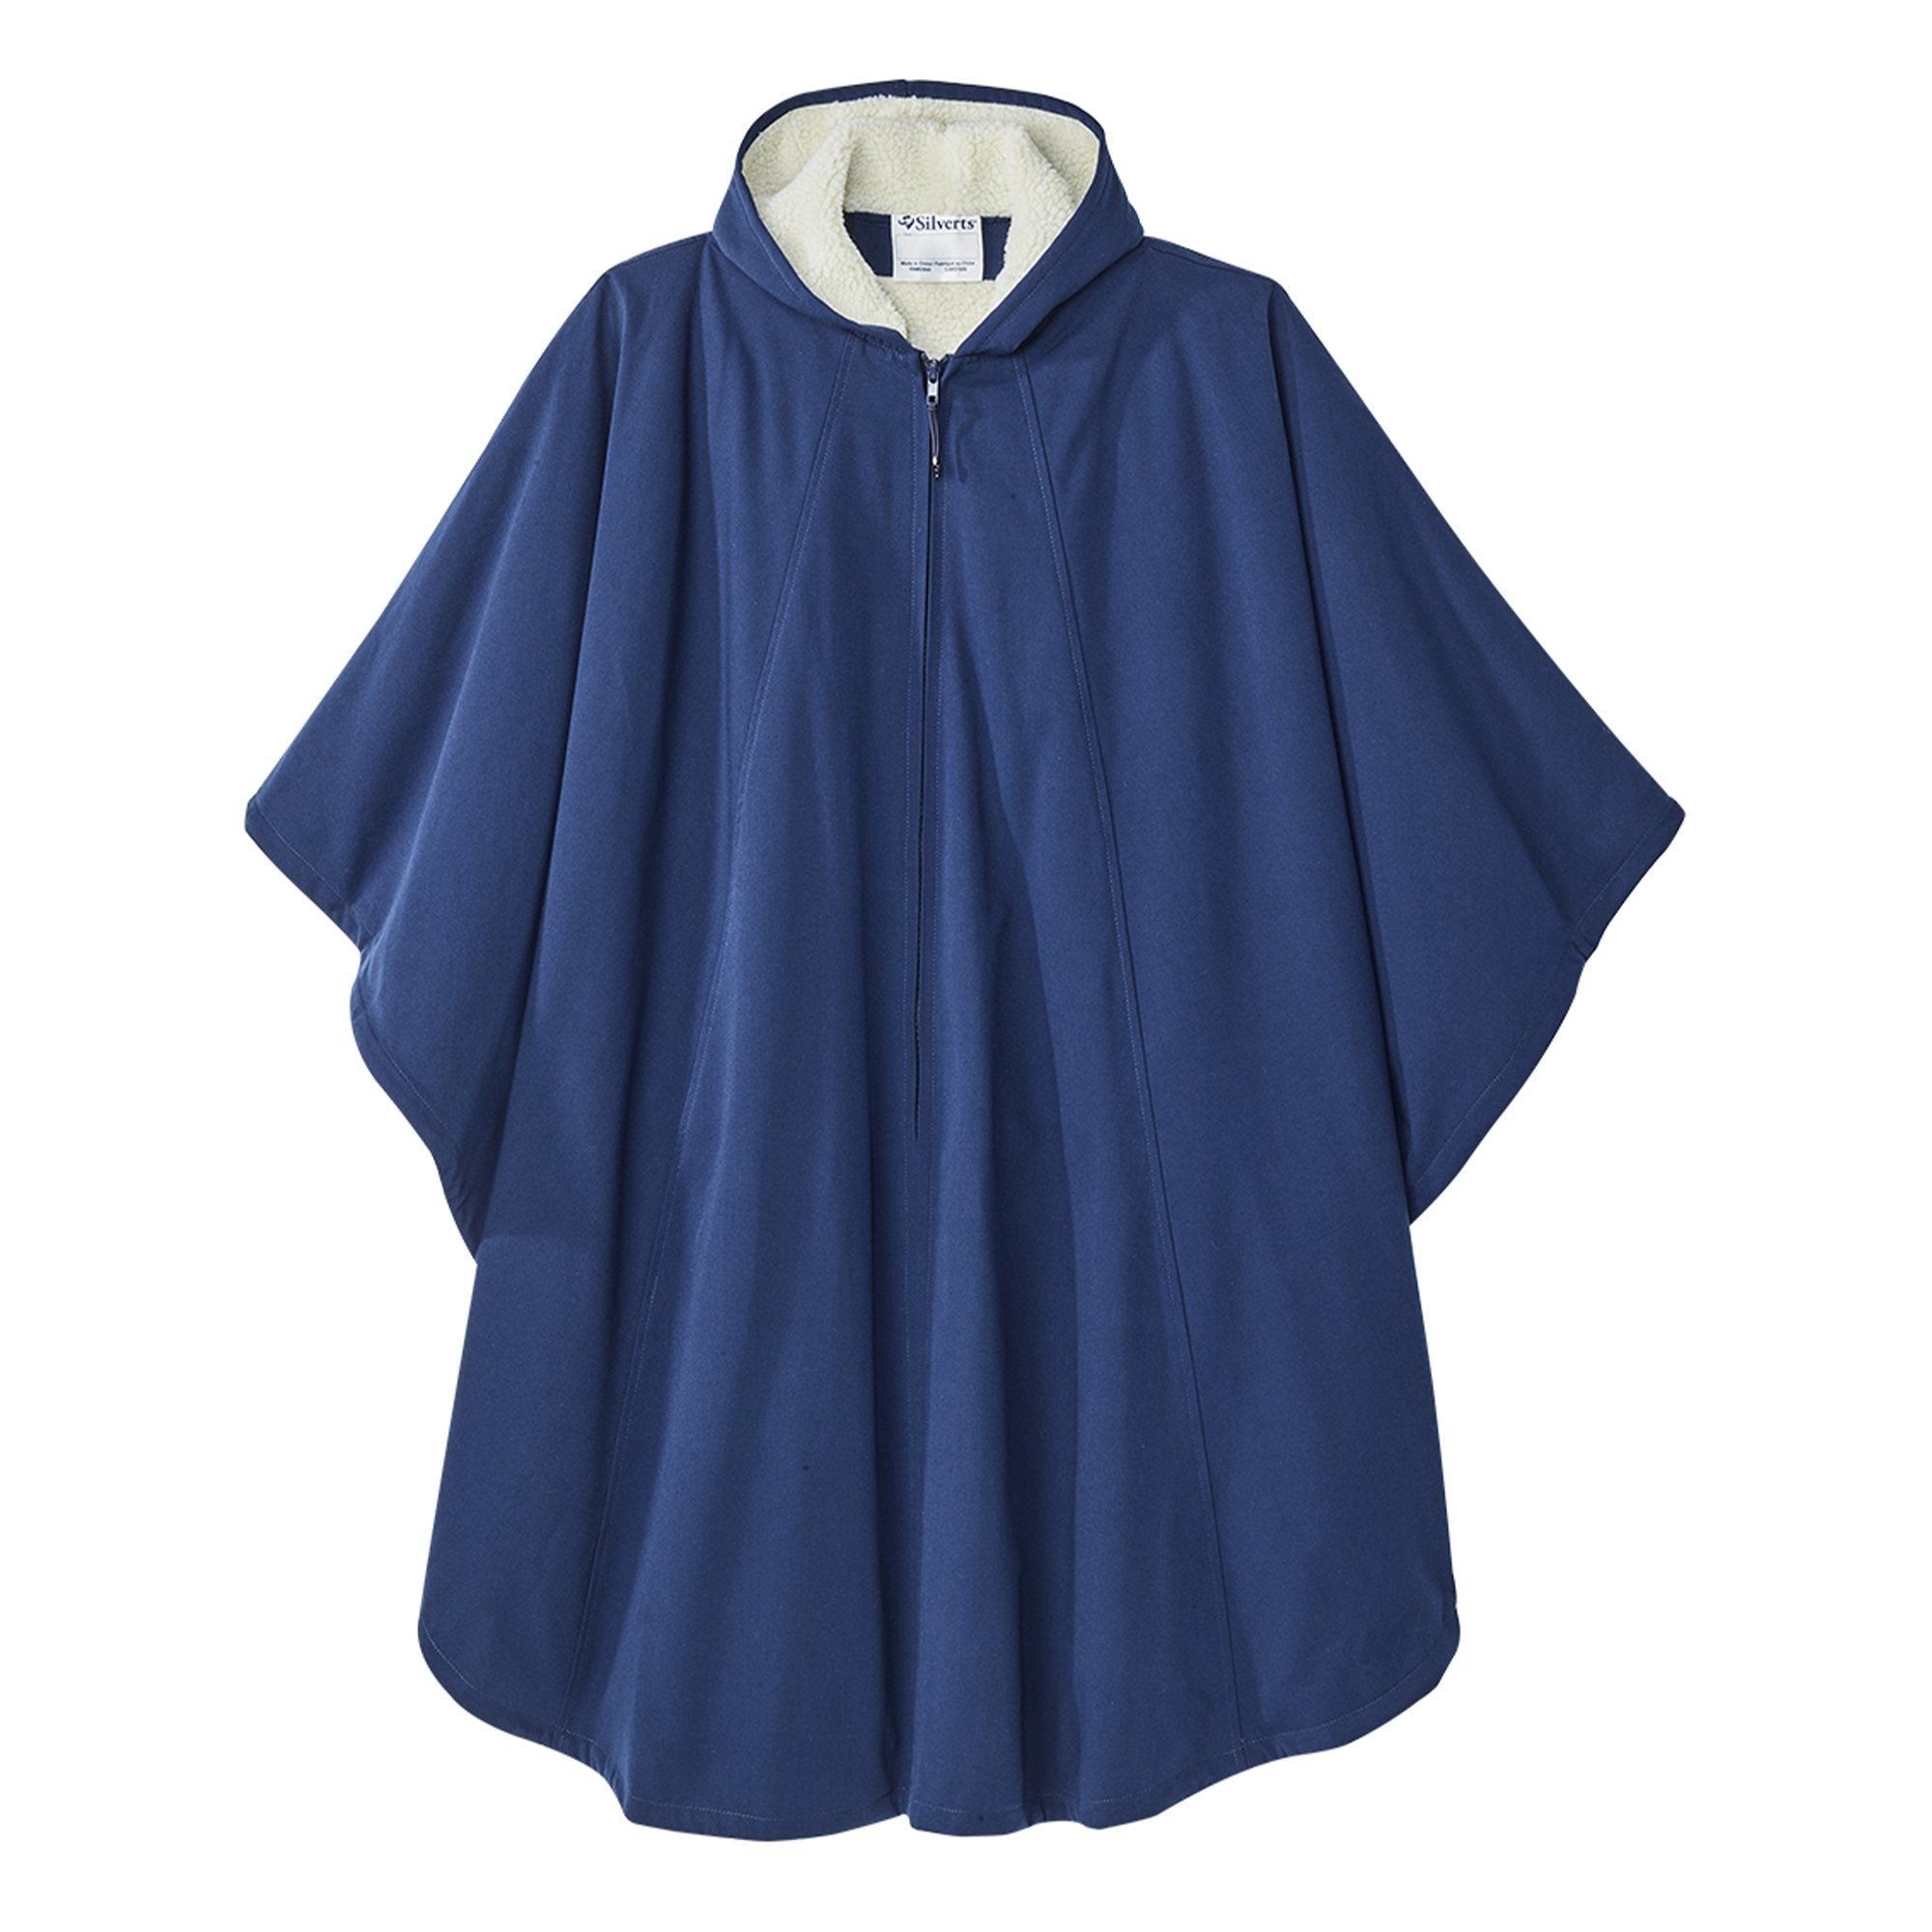 Silverts? Warm Wheelchair Cape with Hood, Navy Blue